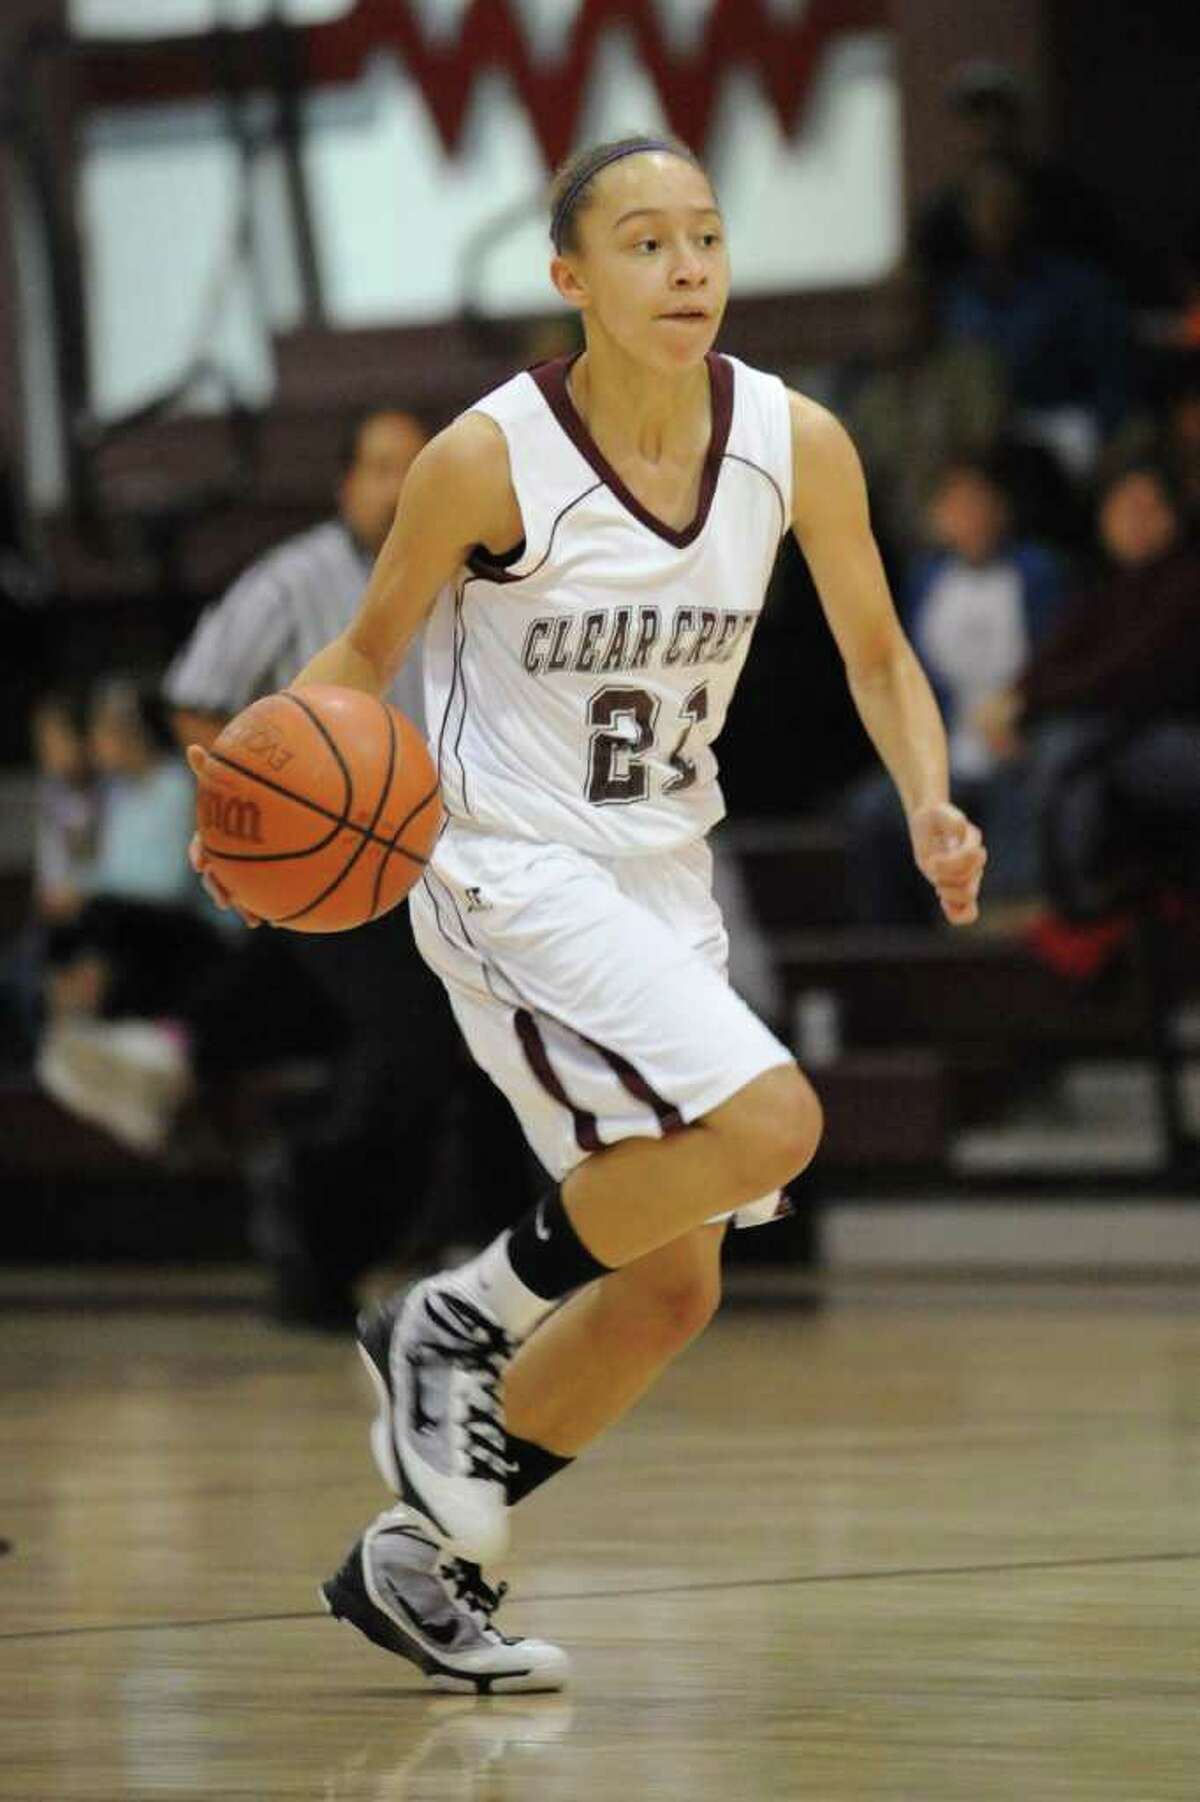 Clear Creek's Brentney Branch was sizzling during the break, averaging 26.4 points per game.